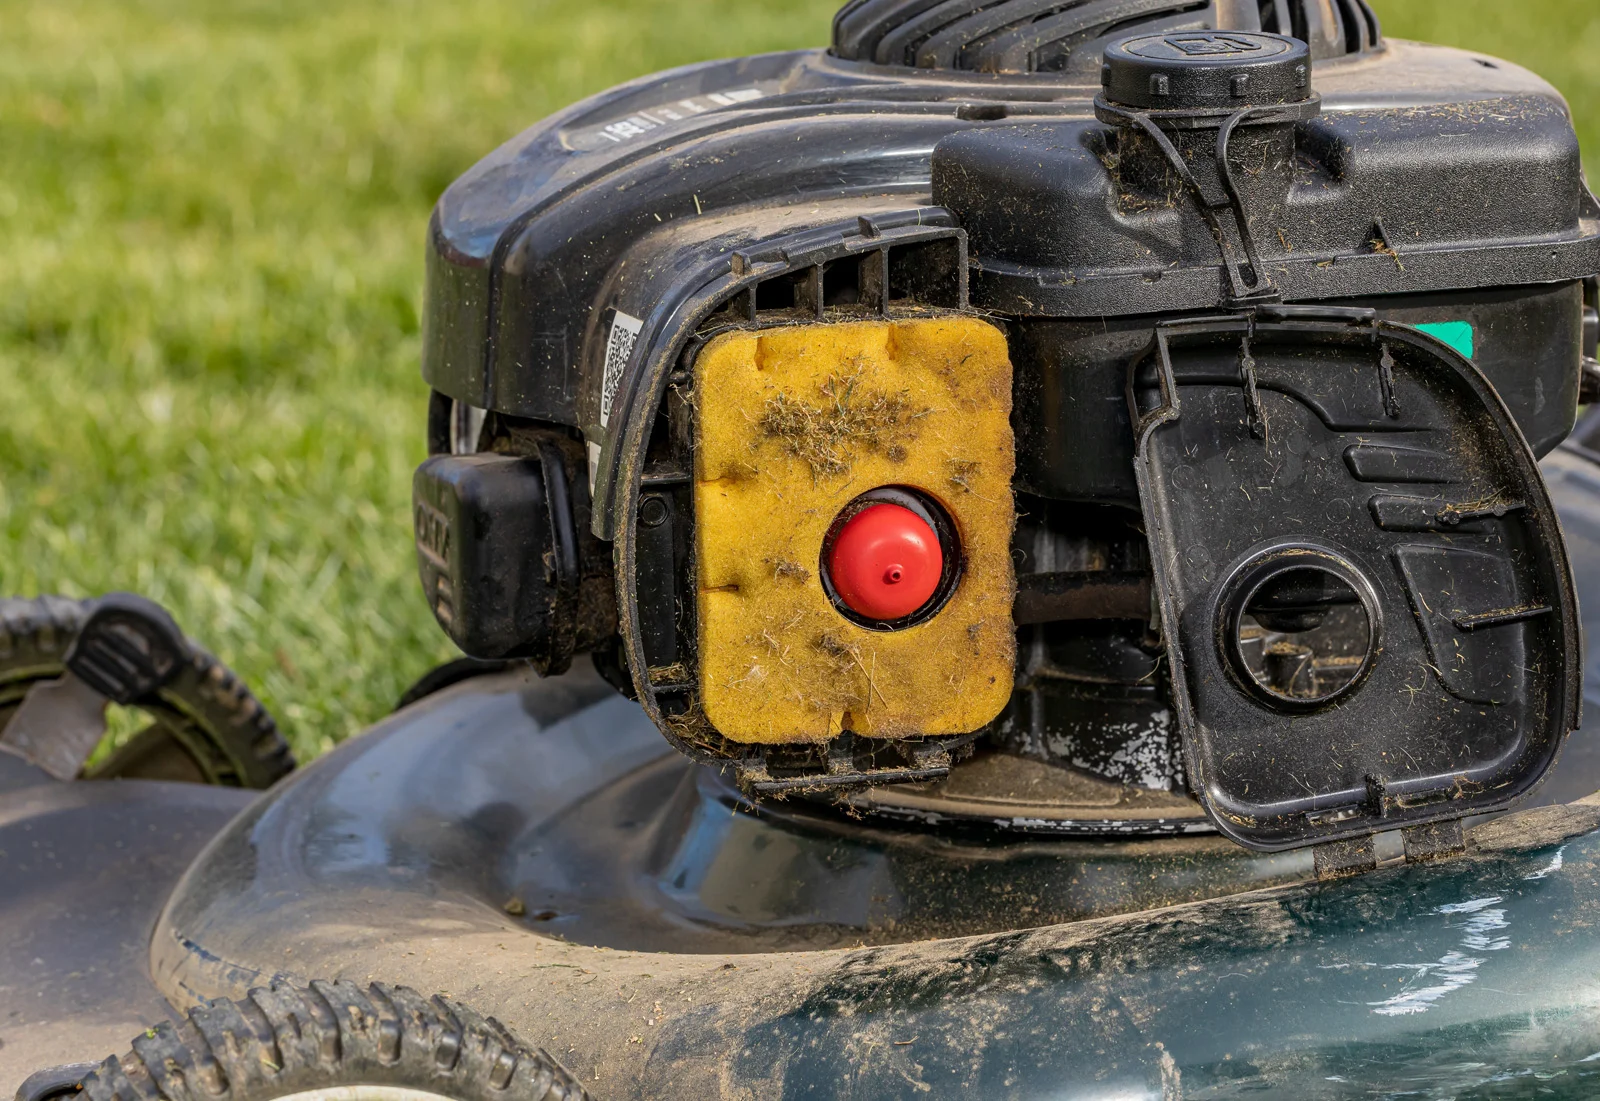 A lawnmower with a dirty engine filter